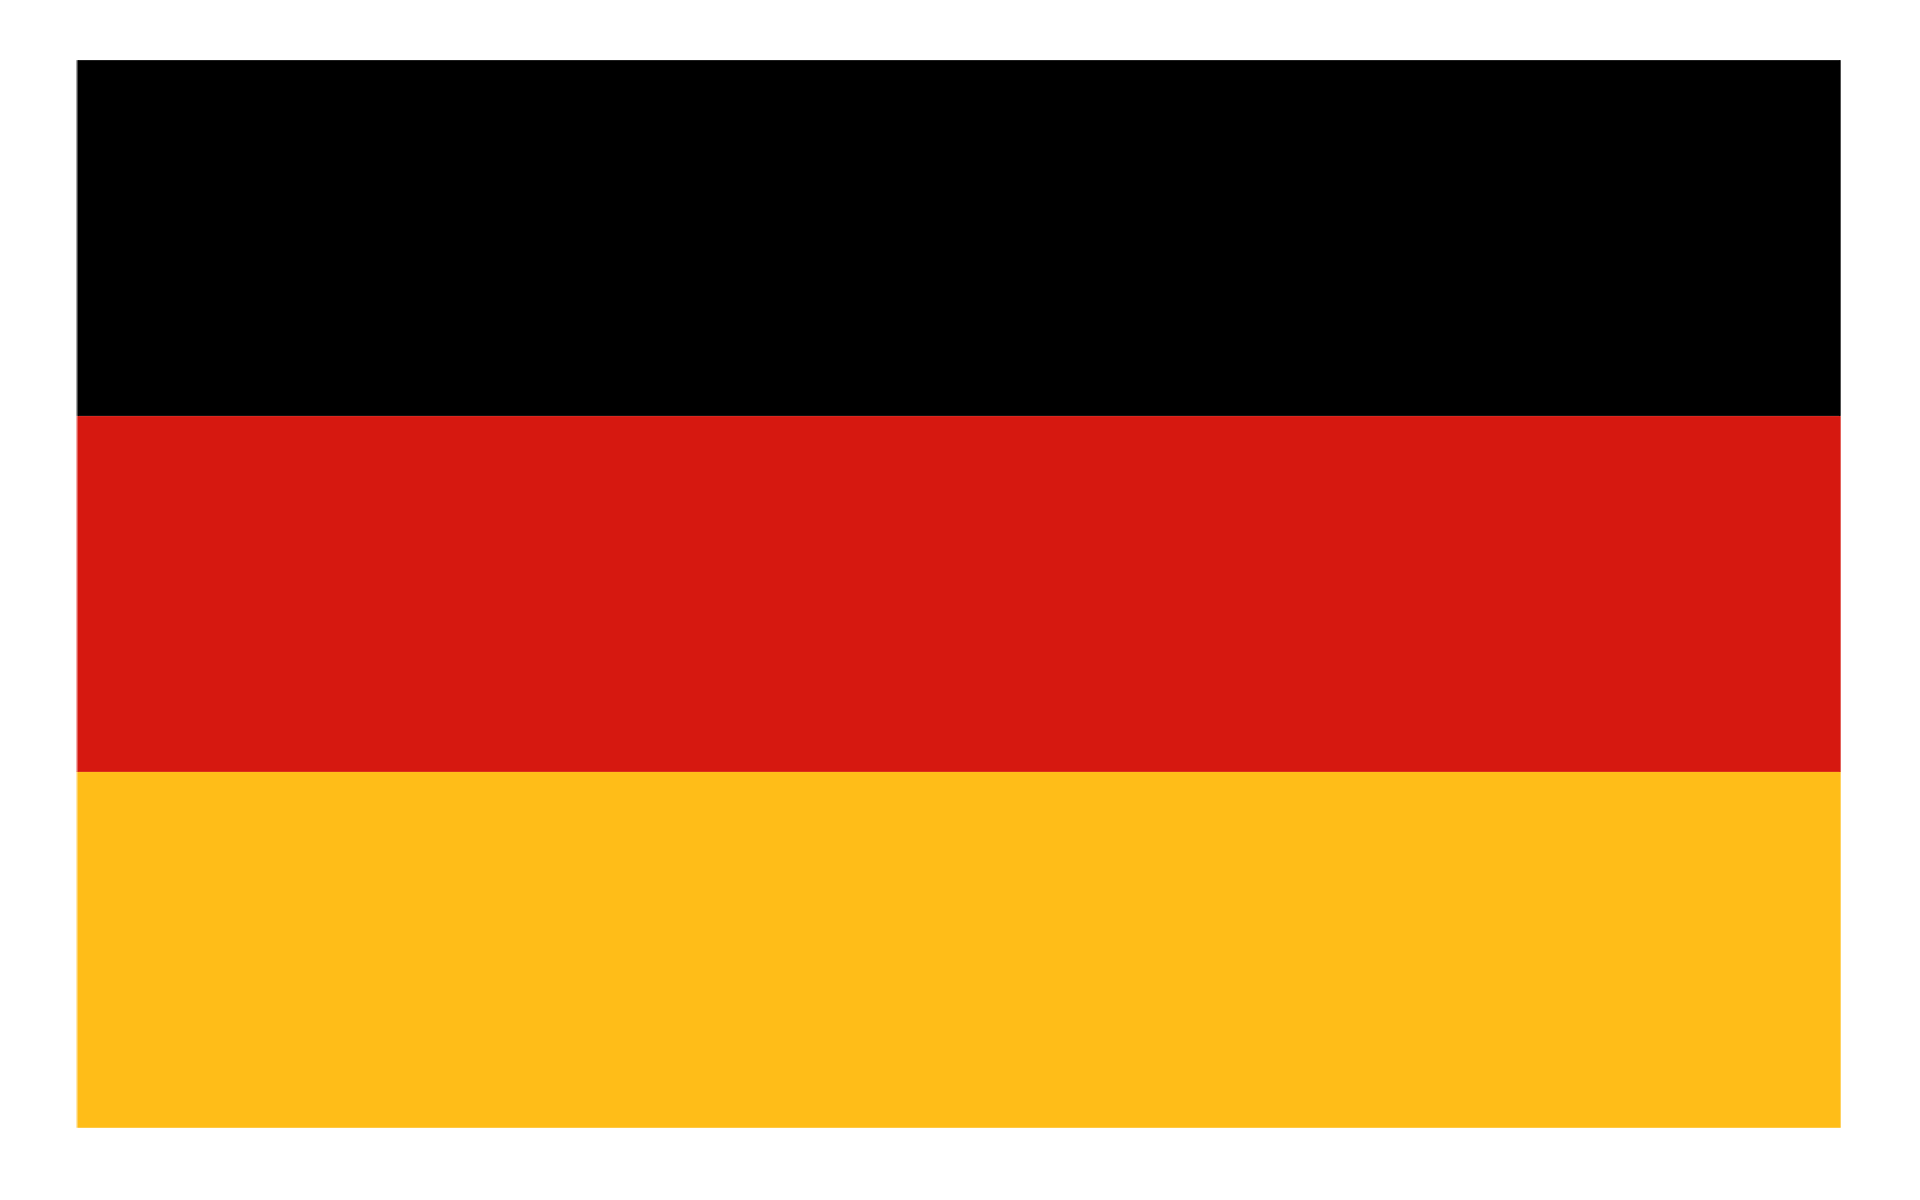 Germany Flag Wallpapers 2015 Wallpaper Cave